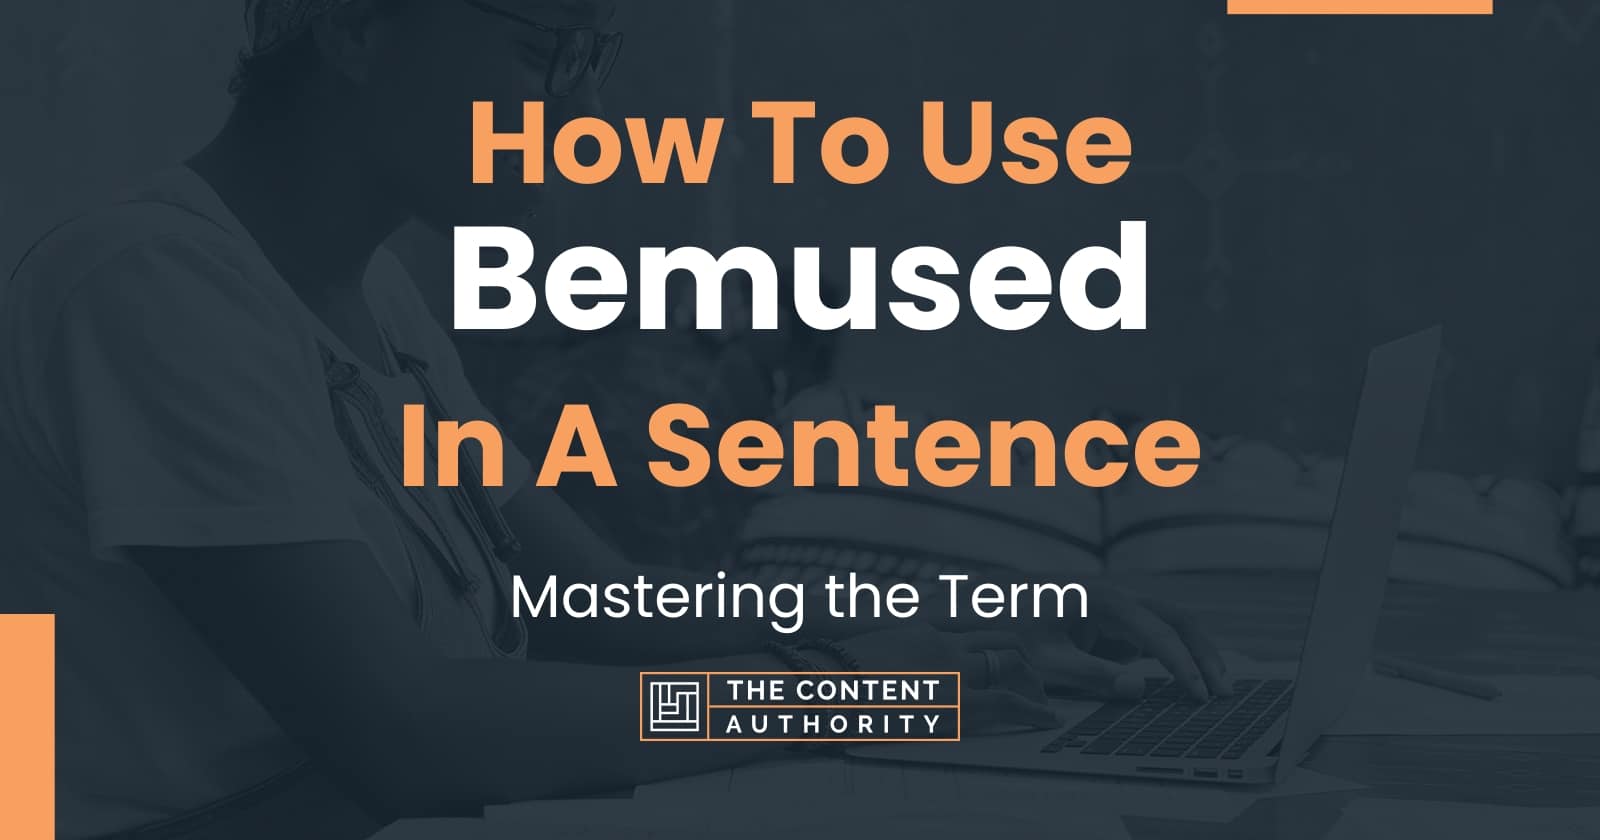 BEMUSED Definition & Usage Examples